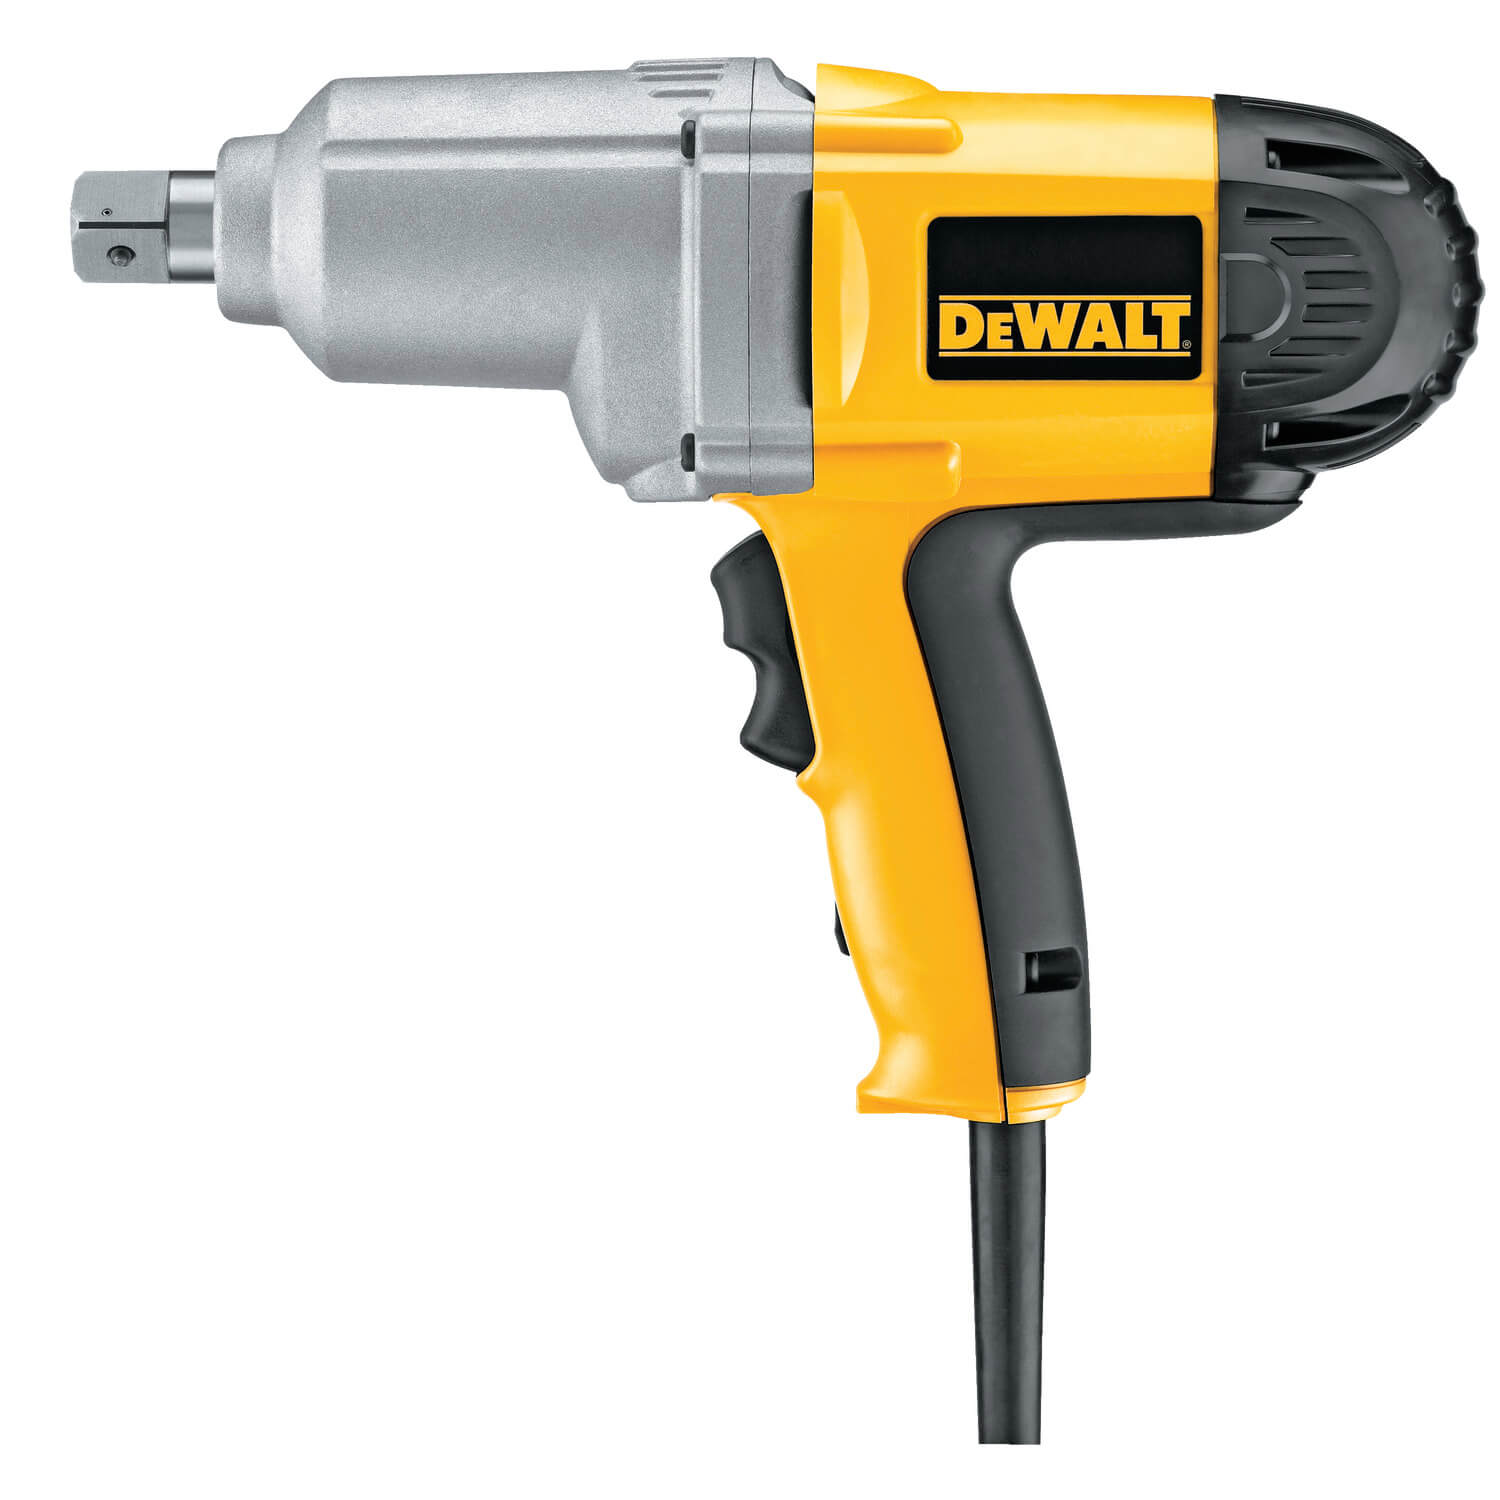 DEWALT DW294 7.5 Amp 3/4-Inch Impact Wrench with Detent Pin Anvil - wise-line-tools